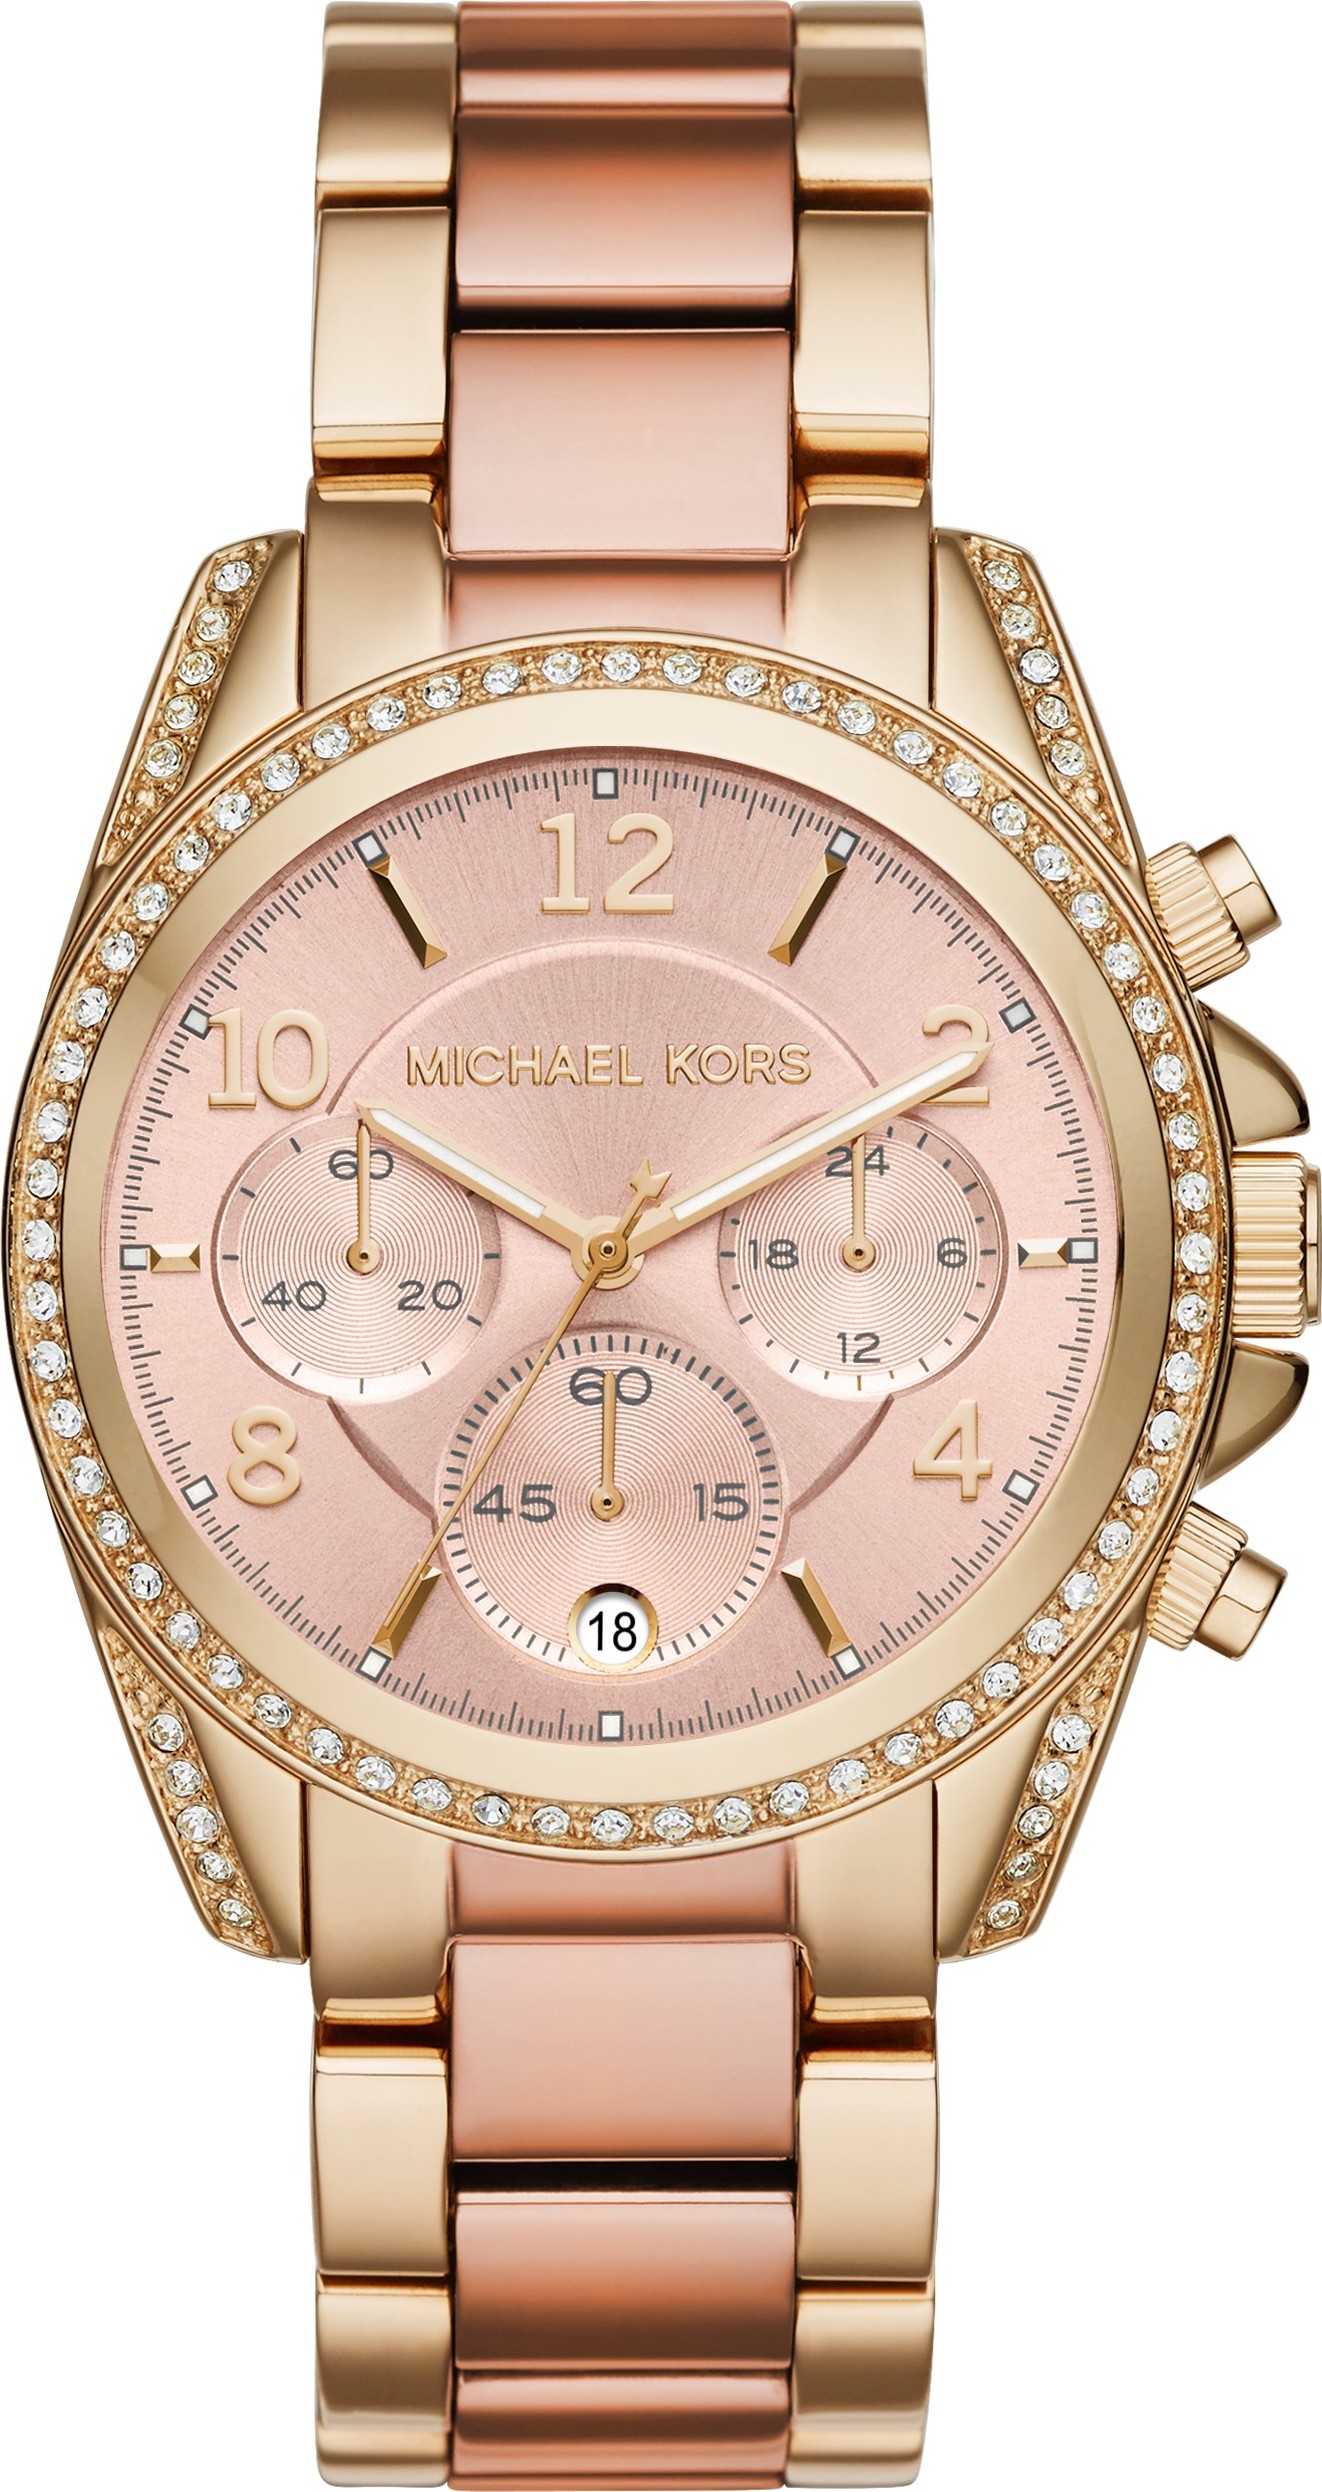 Michael Kors Pyper Ladies Watch in Gold  Angus  Coote